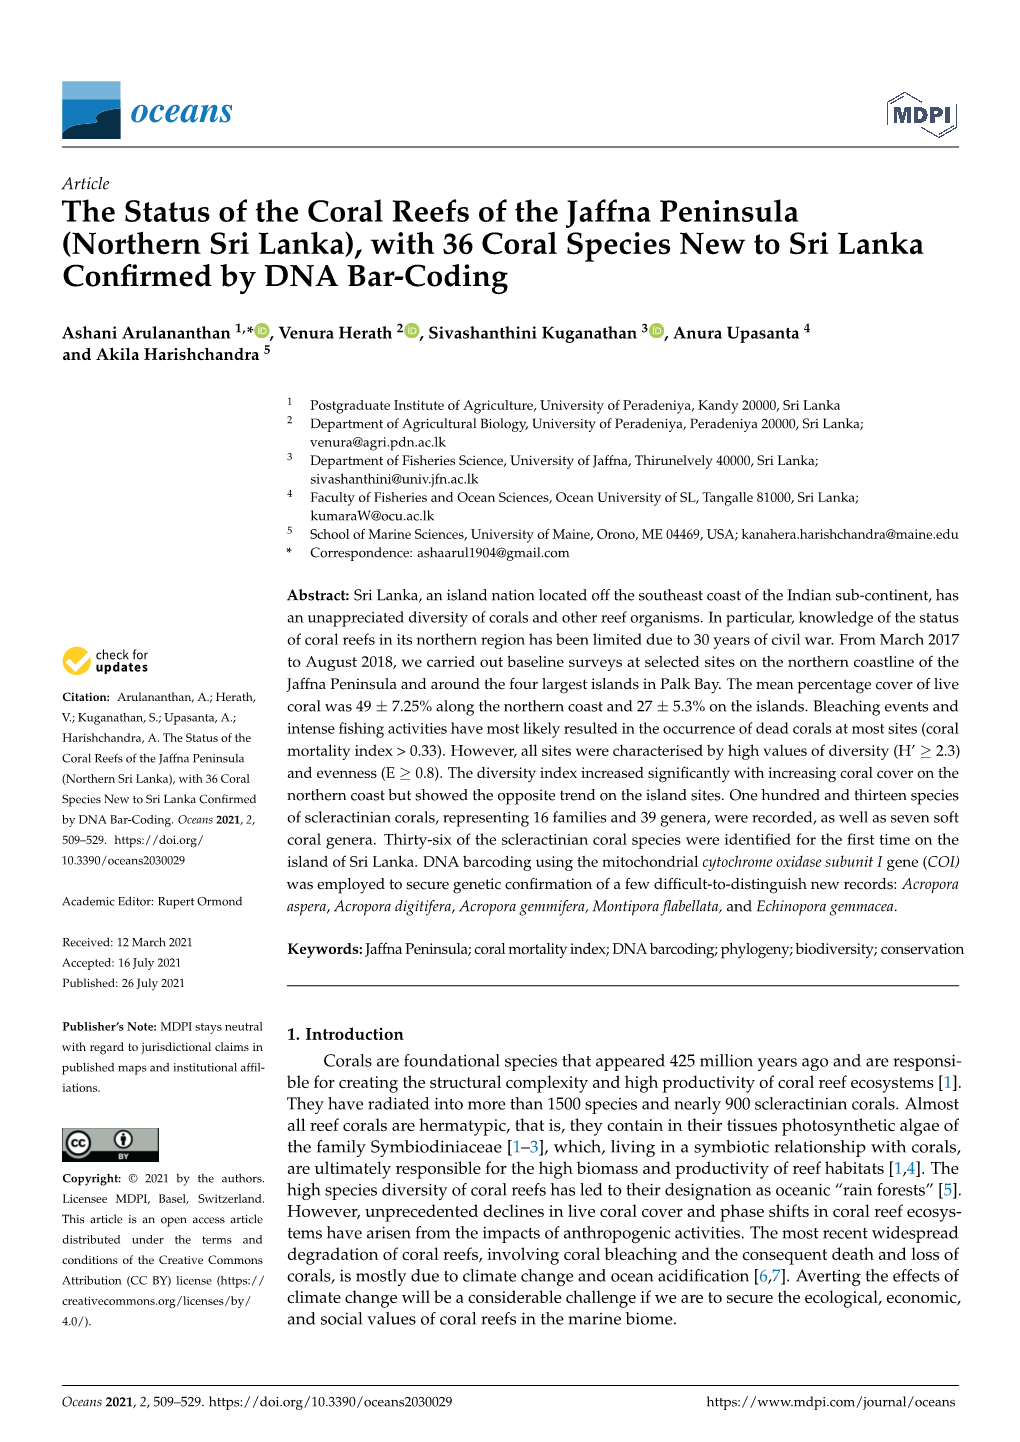 The Status of the Coral Reefs of the Jaffna Peninsula (Northern Sri Lanka), with 36 Coral Species New to Sri Lanka Conﬁrmed by DNA Bar-Coding